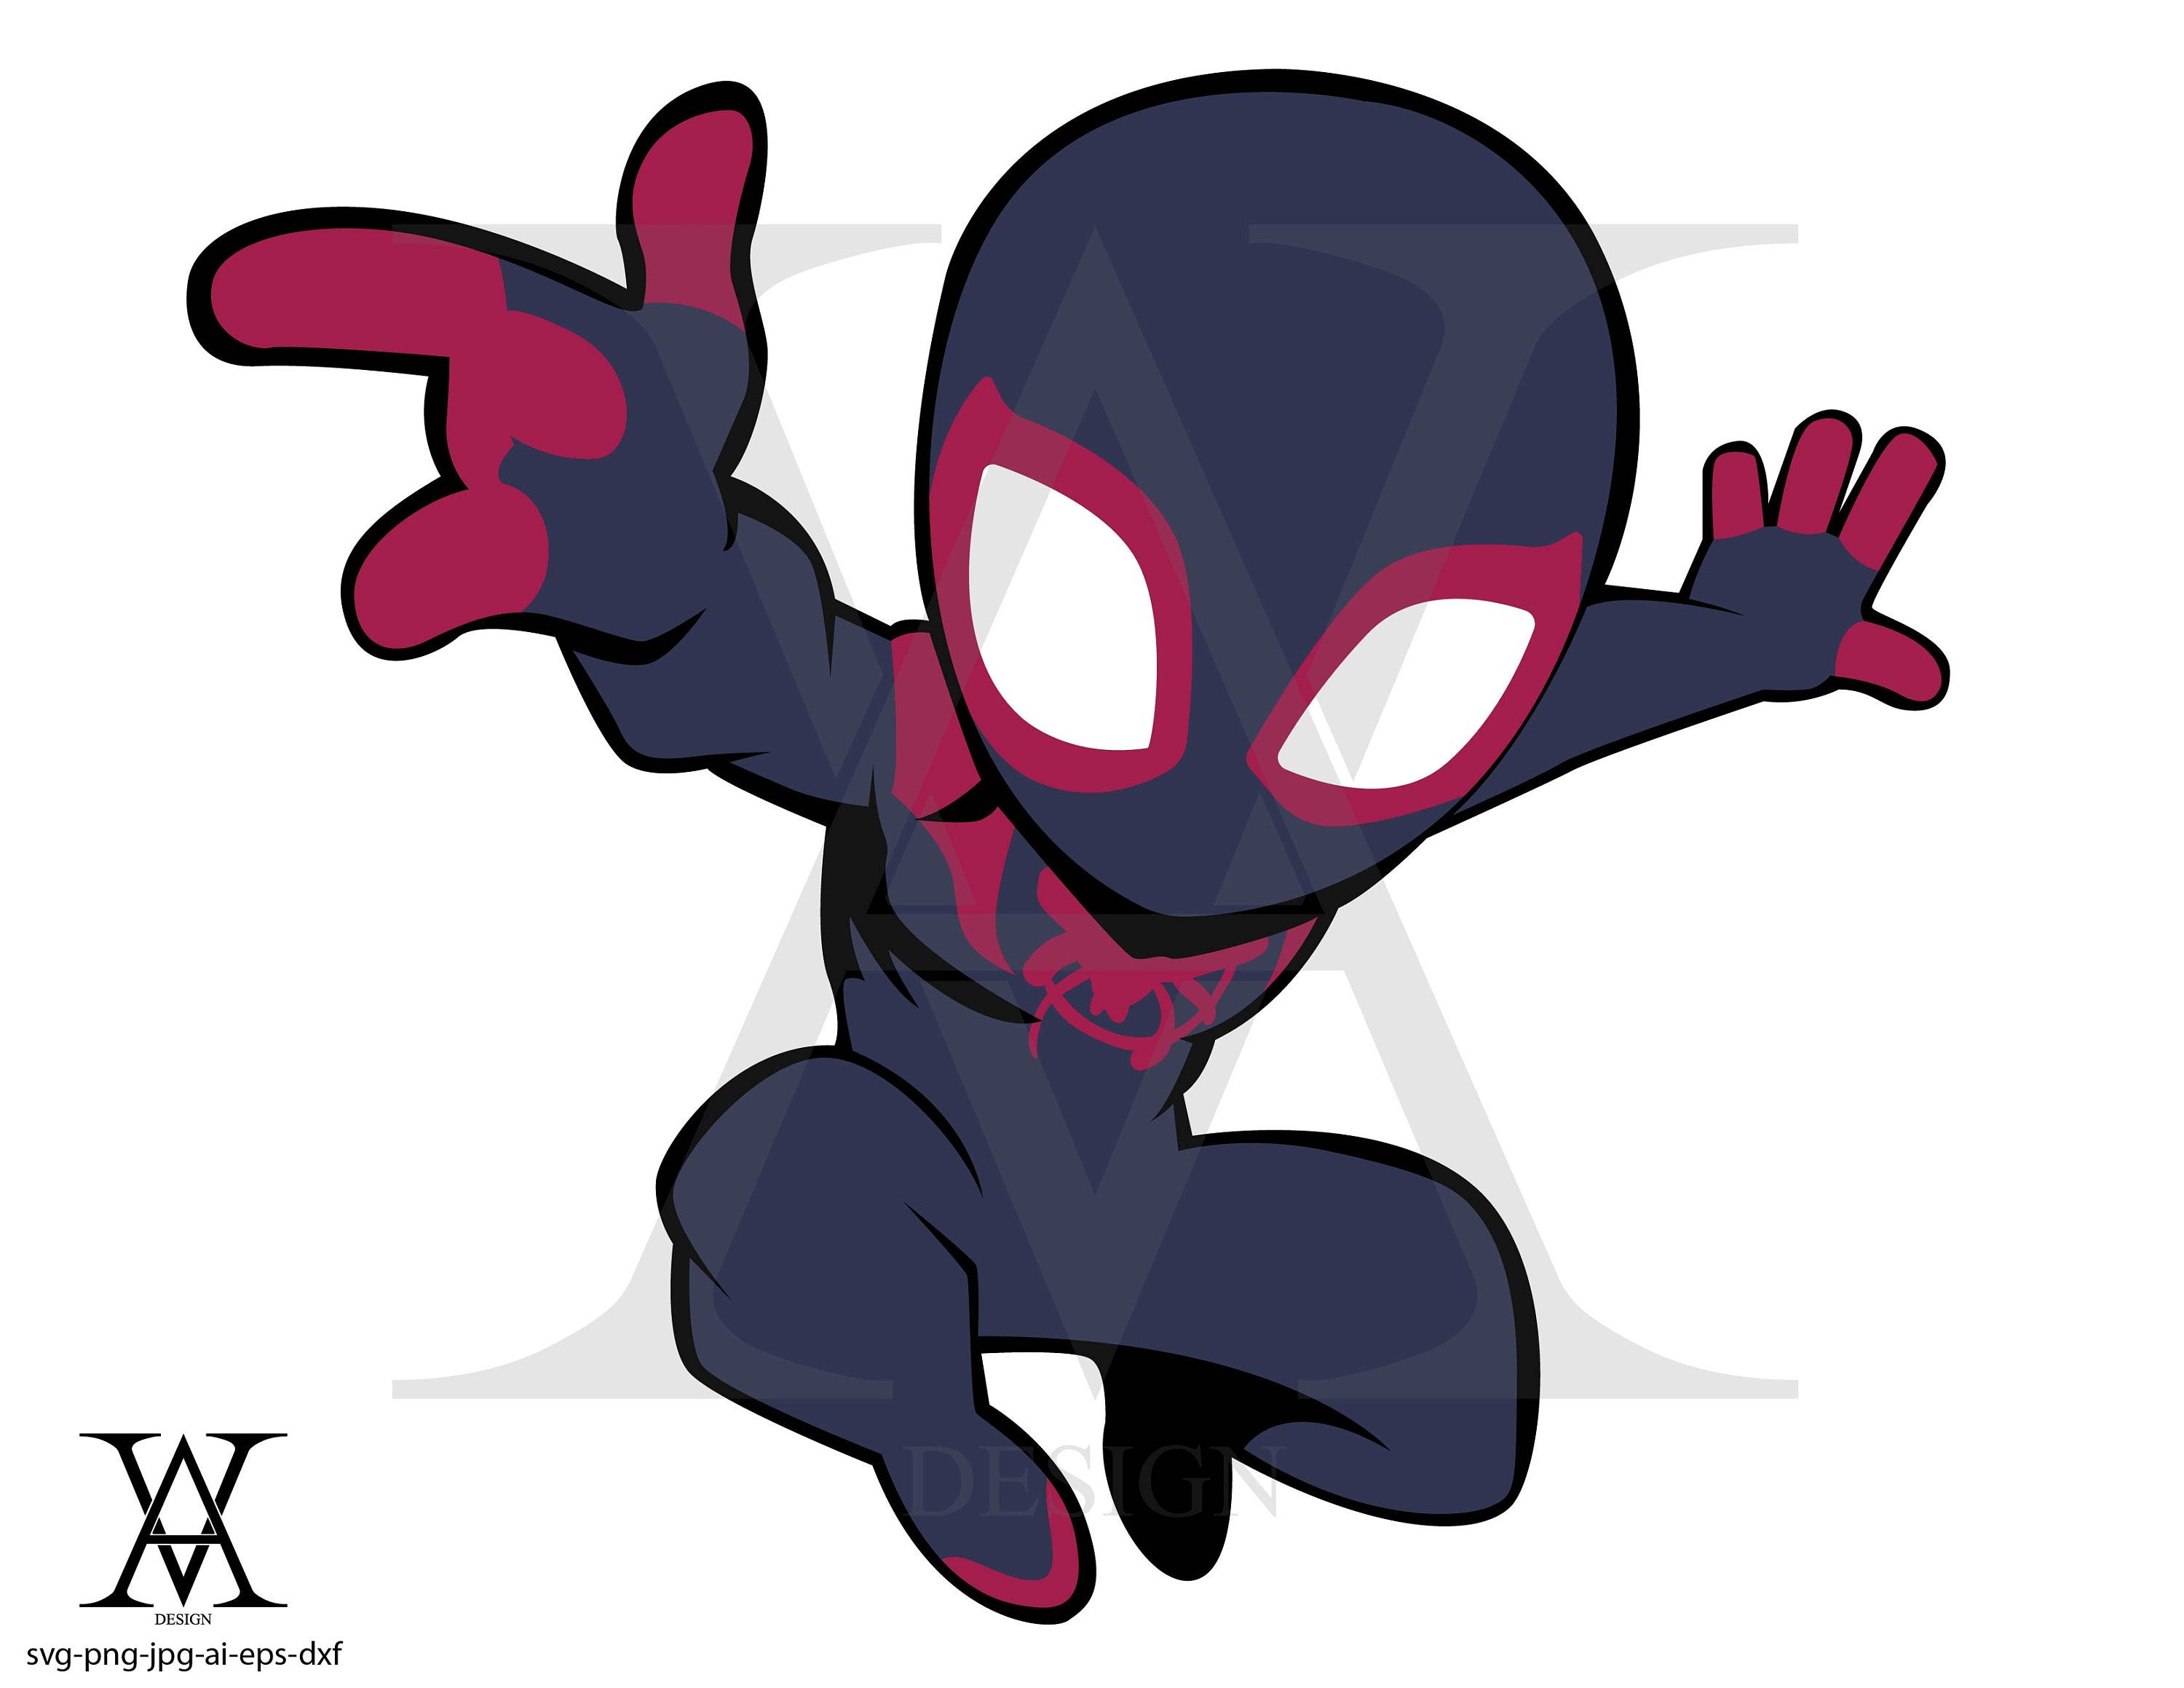 Spiderman Miles Morales Chibi Vector Clipart Instant Etsy. 